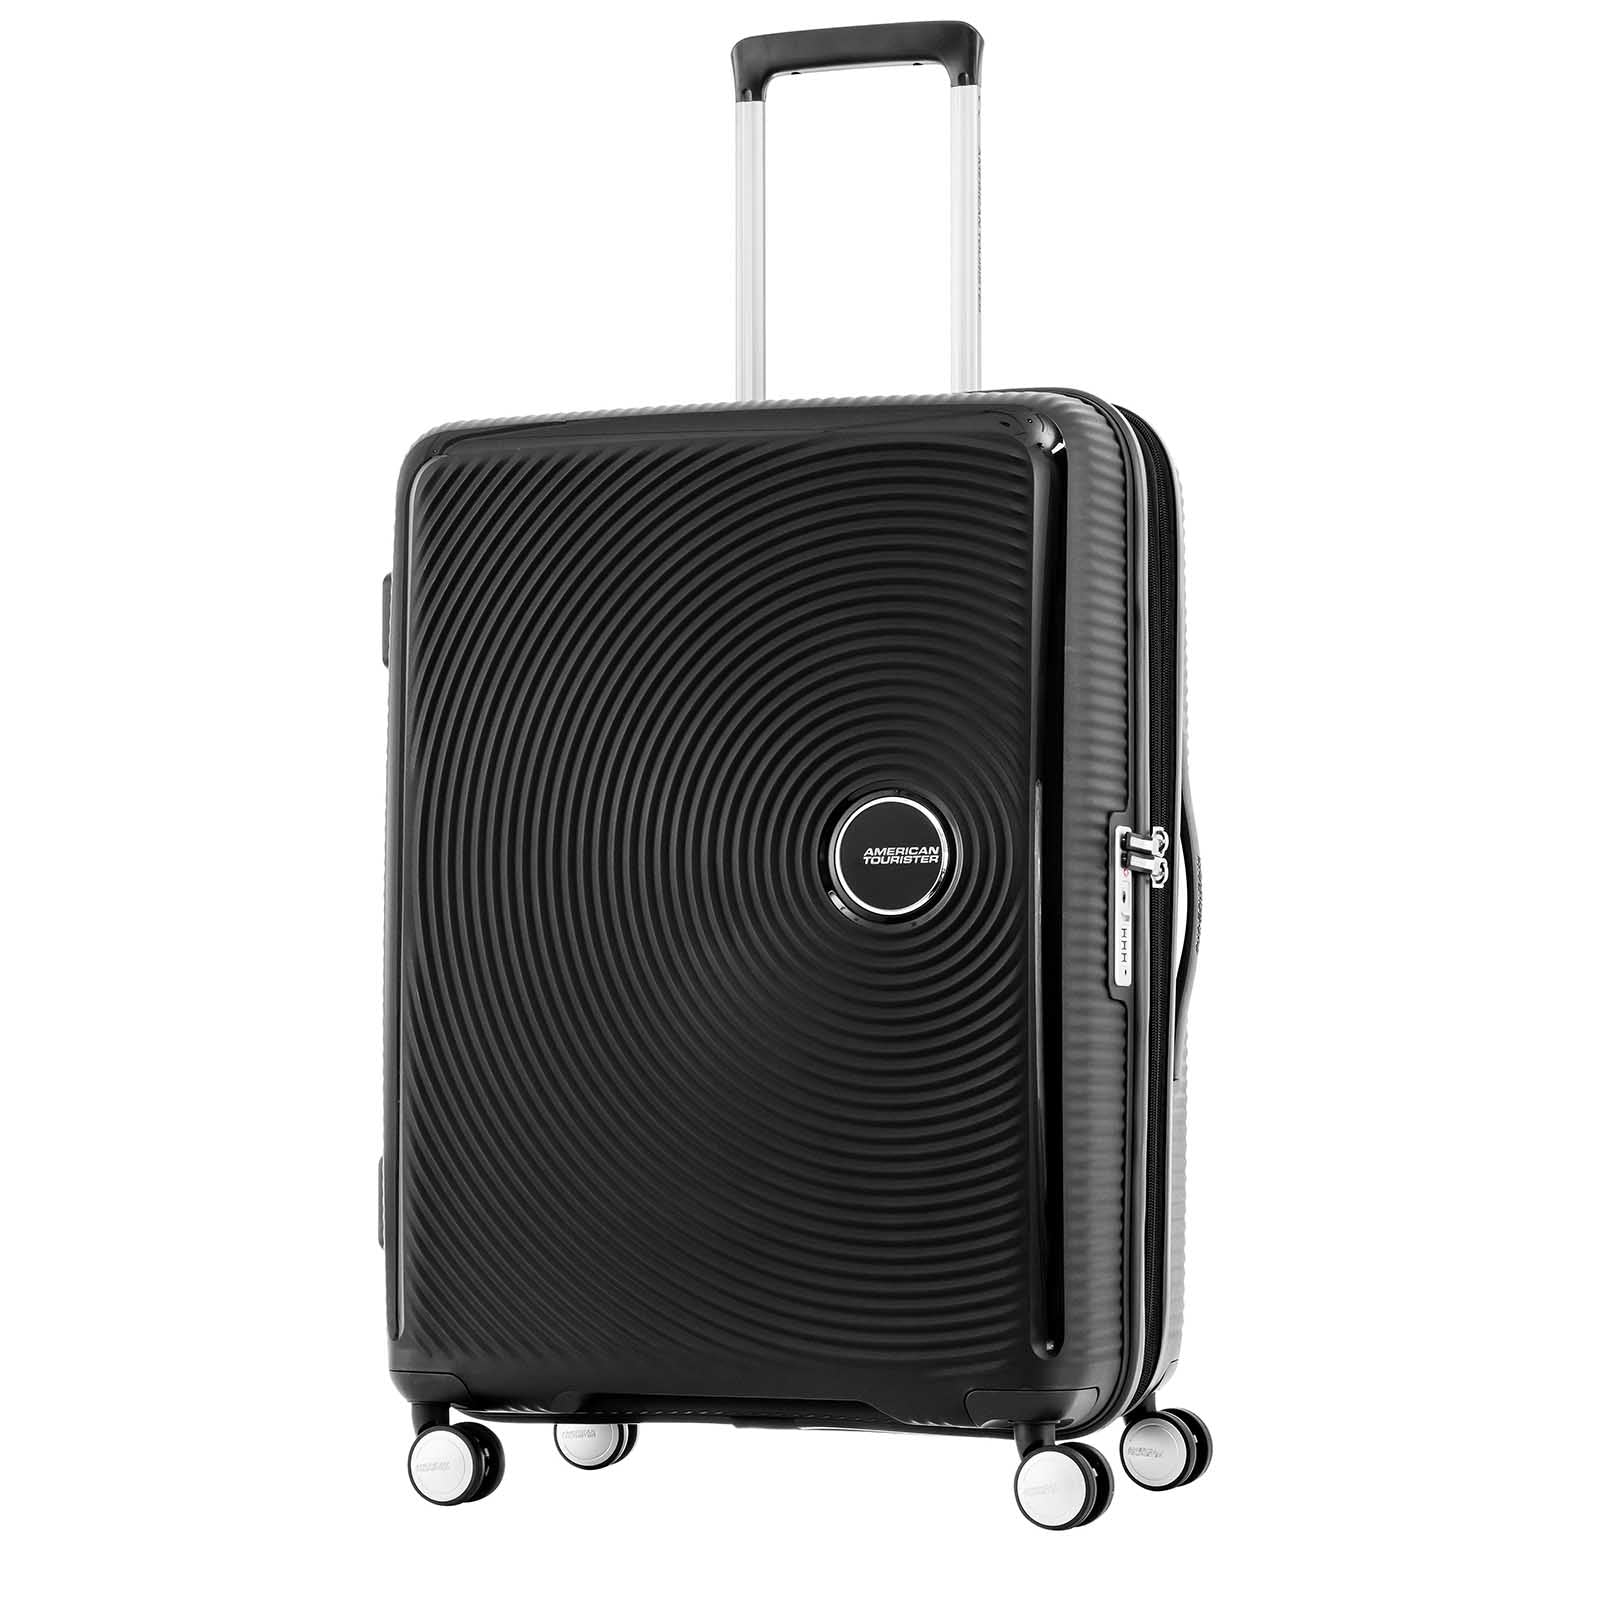 American-Tourister-Curio-2-69cm-Suitcase-Black-Front-Angle